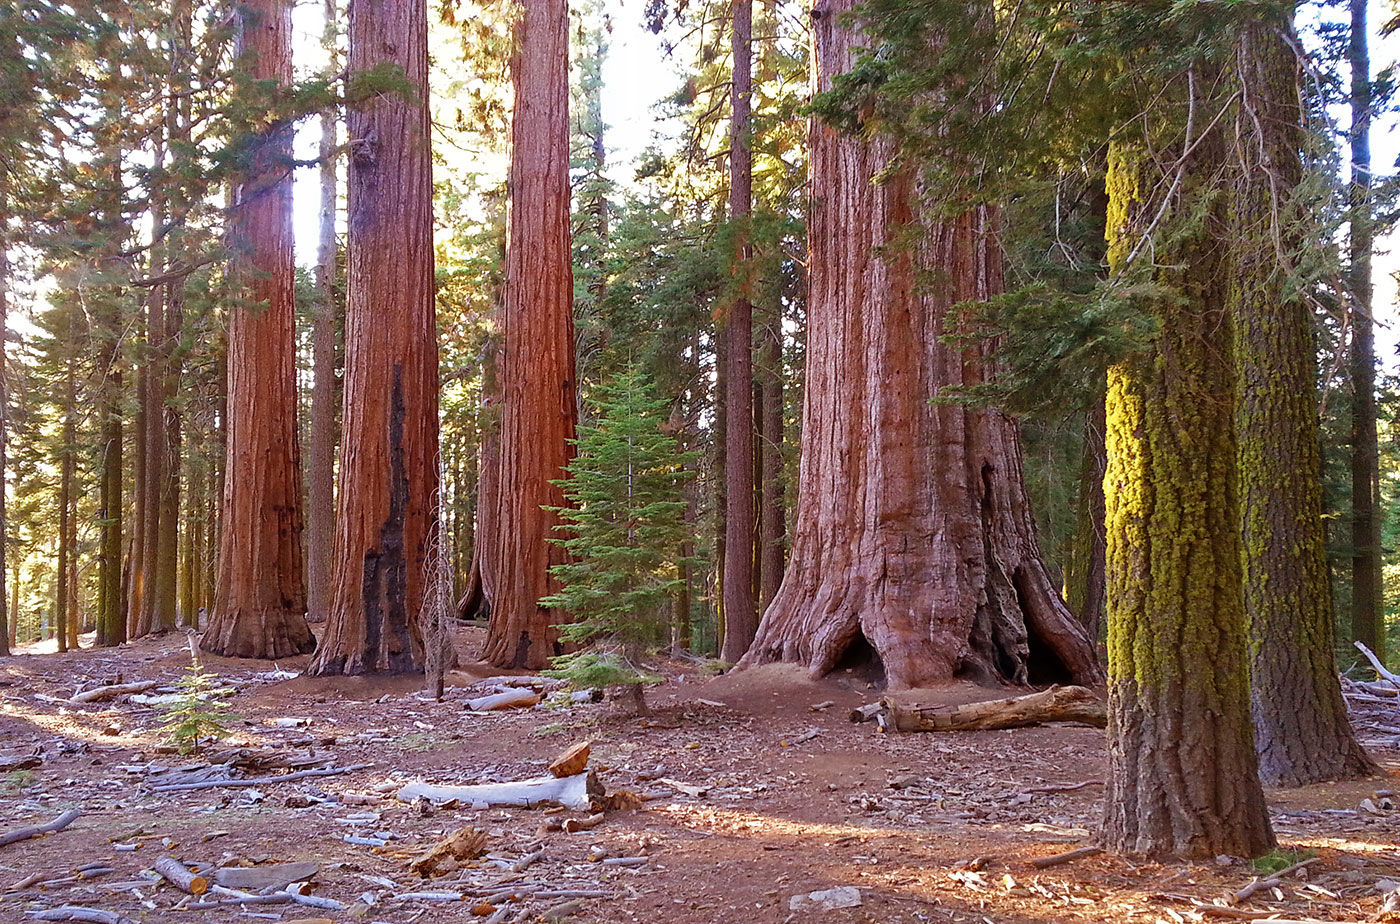 Does Yosemite National Park Have Sequoia Trees?